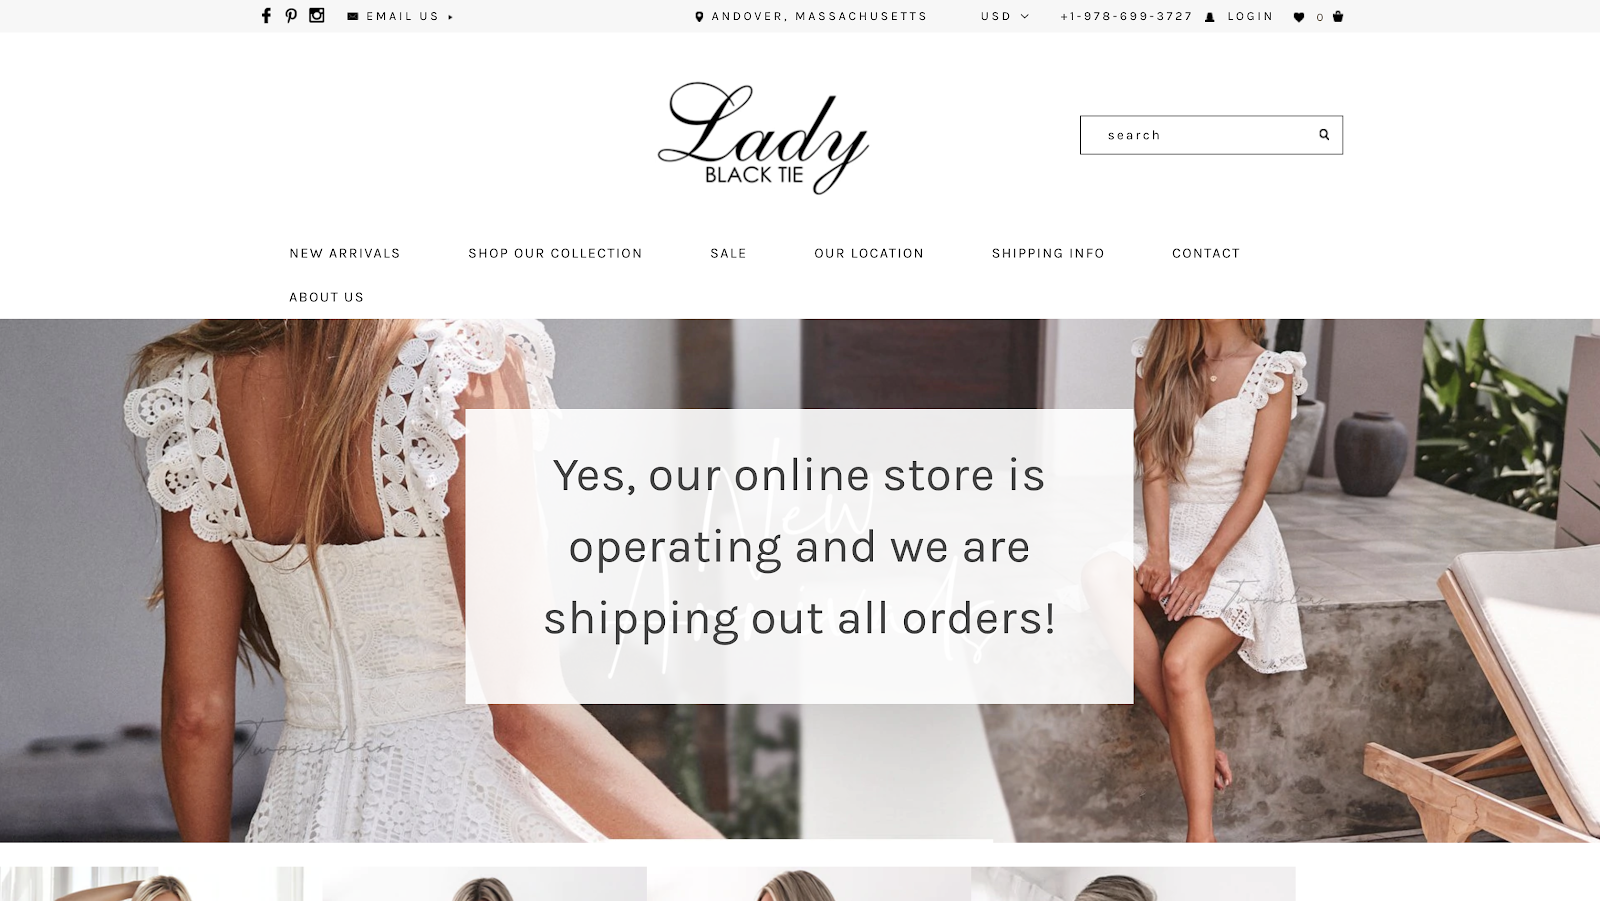 A screenshot of the Lady Black Tie website homepage where a banner that reads "yes, our online store is operating and we are shipping out all orders!" can be seen over the hero image